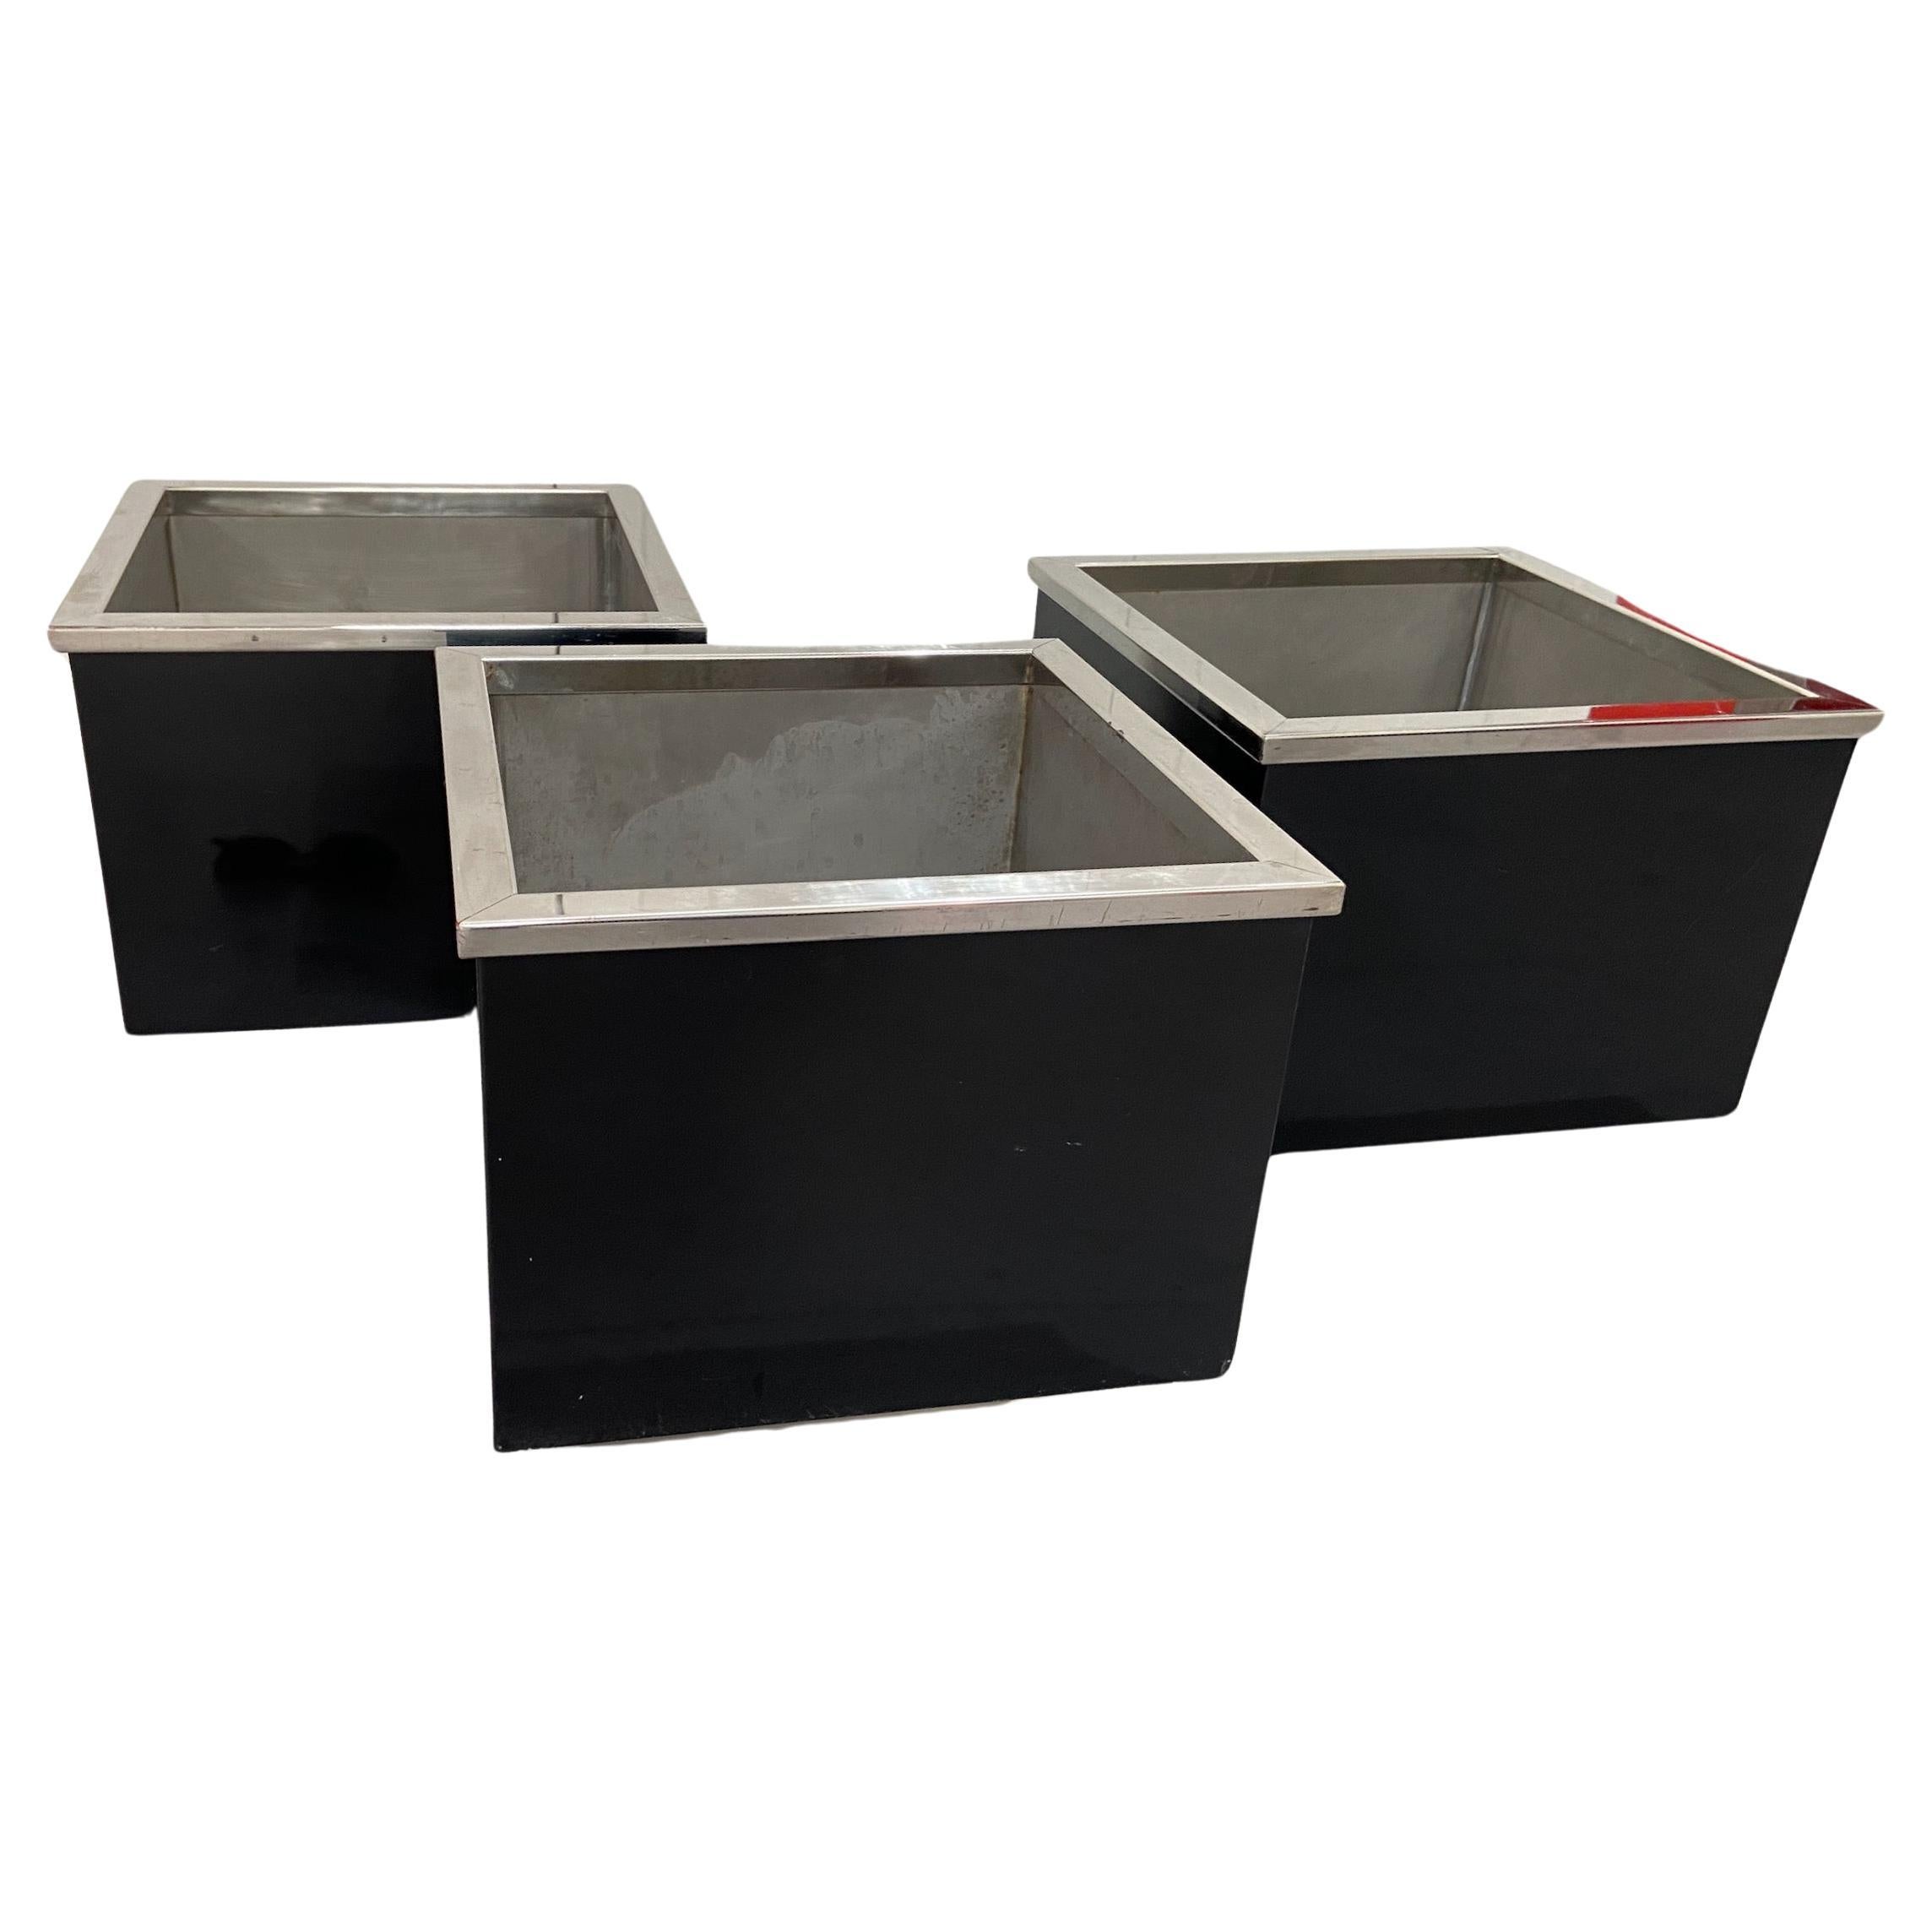 Mid-century black enamelled metal planters with chrome rim and stainless steel base and lining, in the manner of Willy Rizzo. Very good quality and design. 
3 planters available.